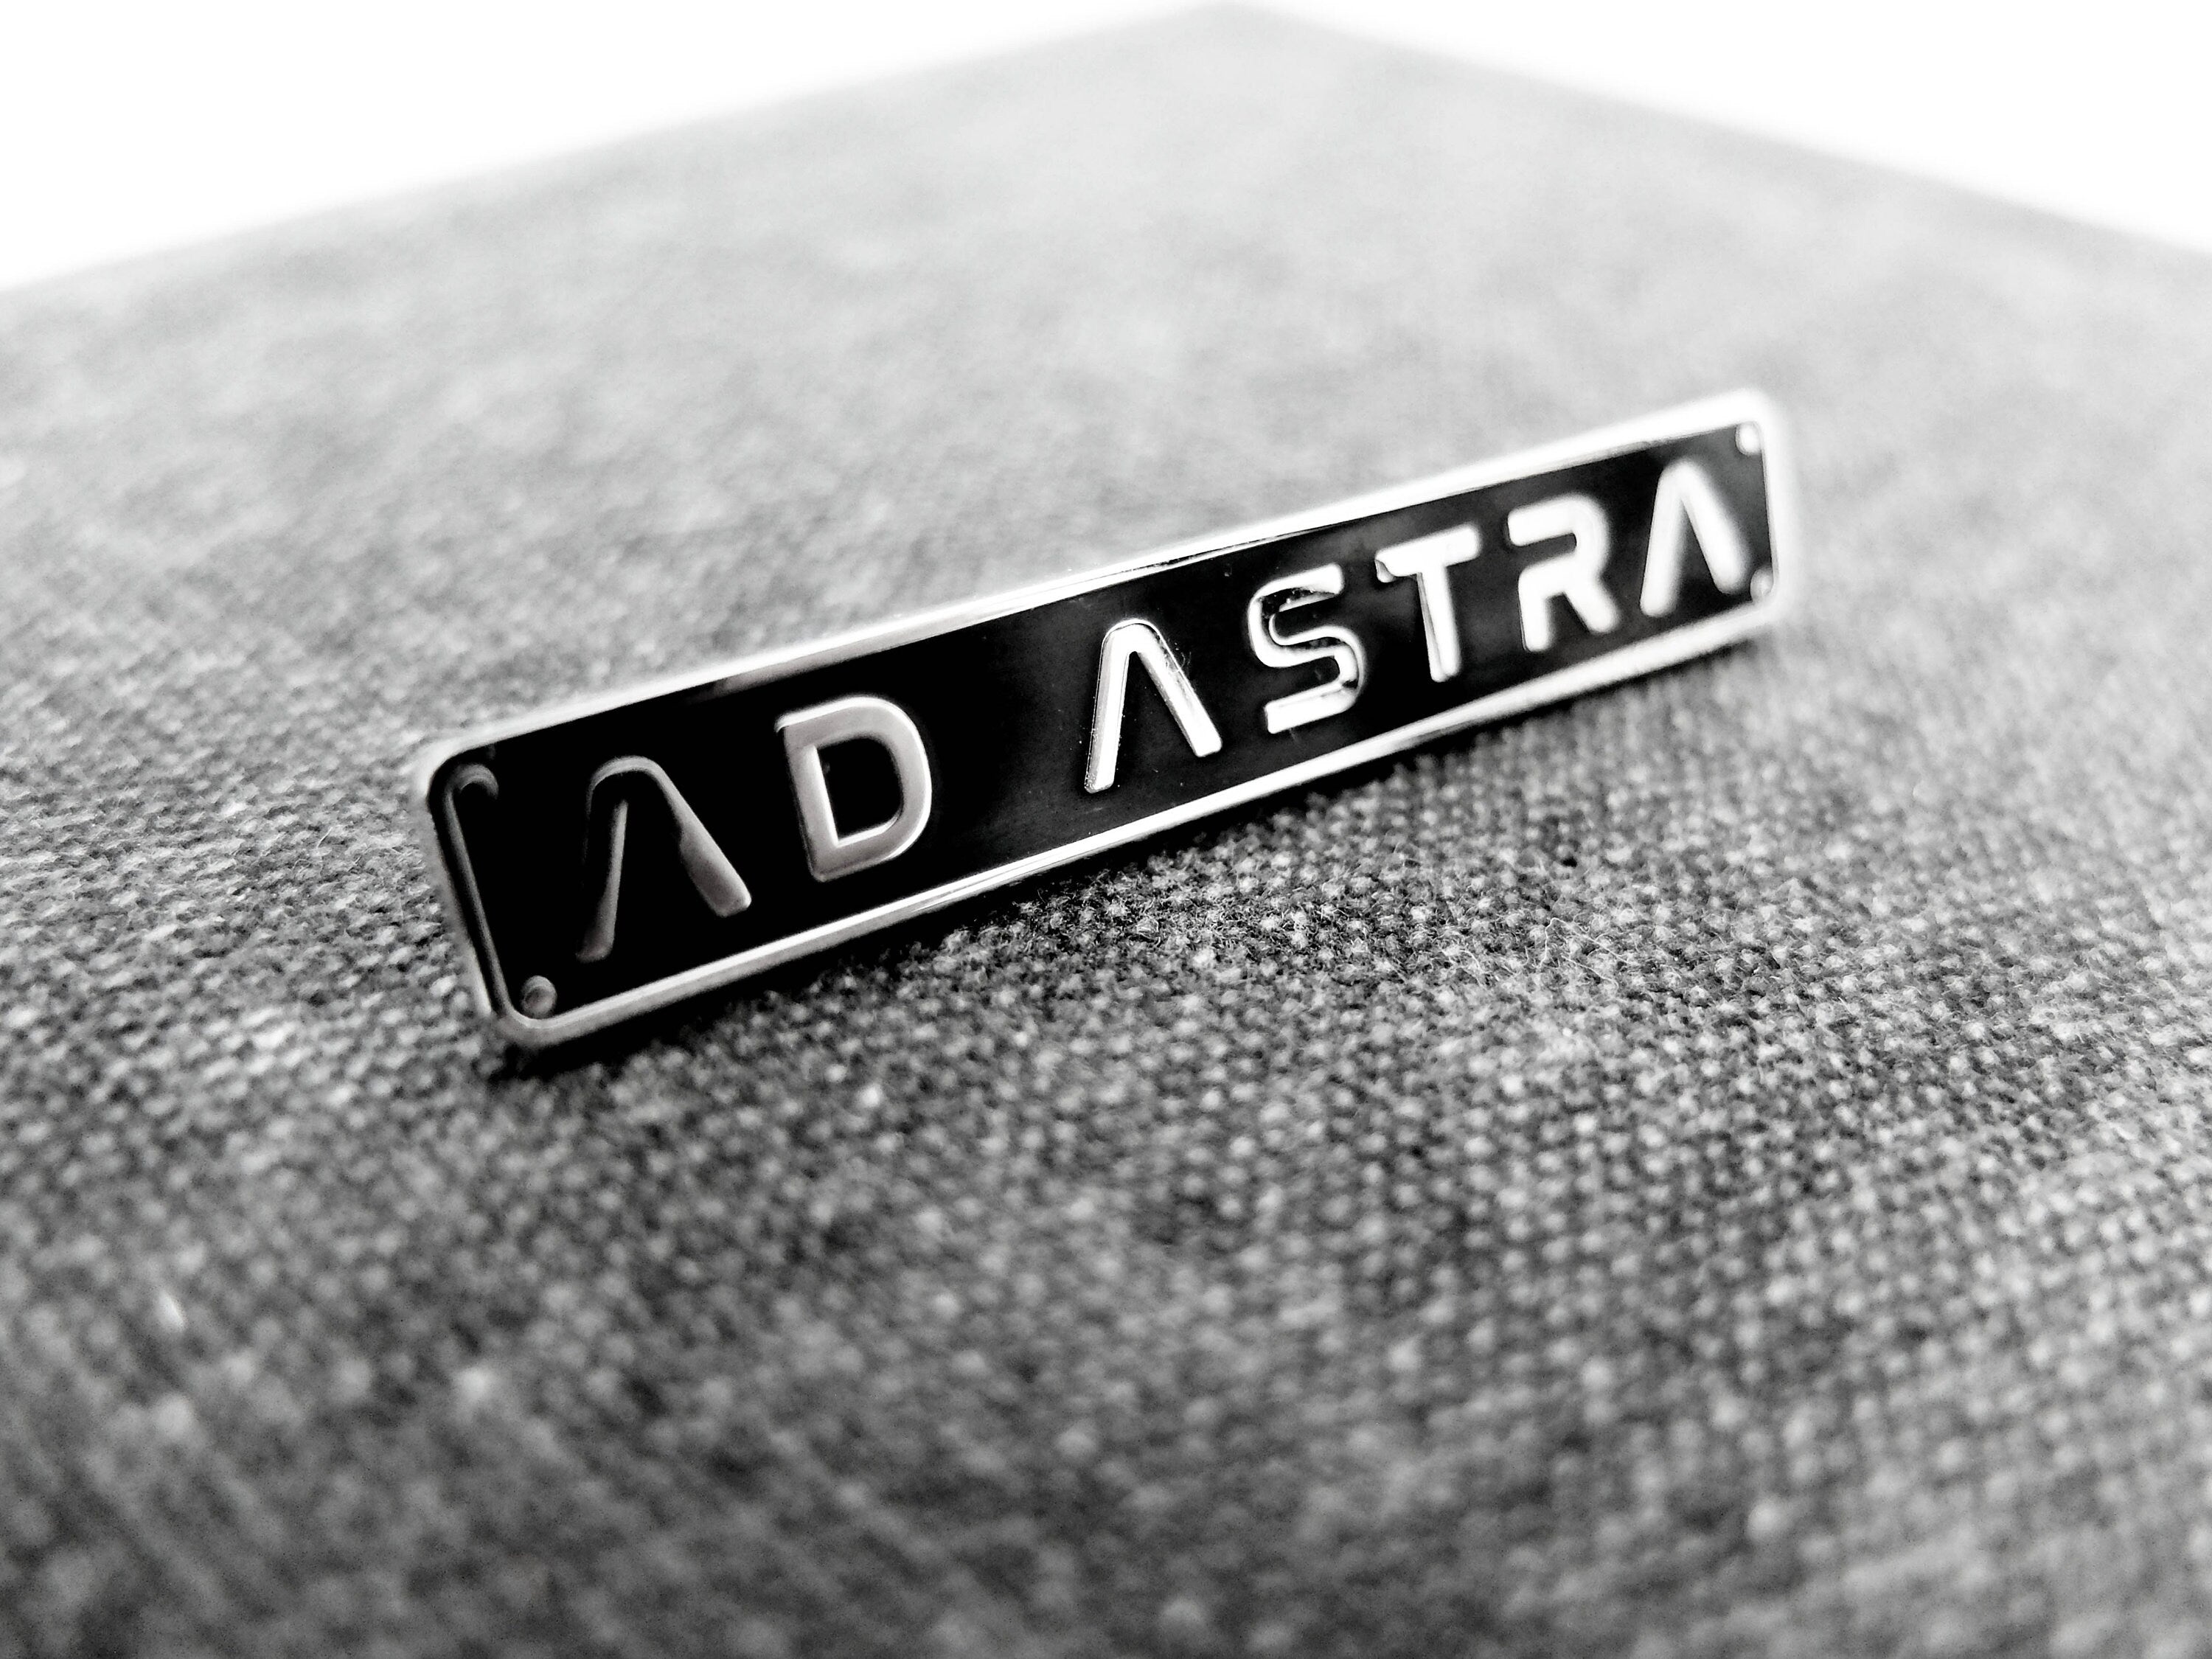 Ad Astra Enamel Pin - To The Stars Lapel Pin- Space & Astronomy Lovers Gift